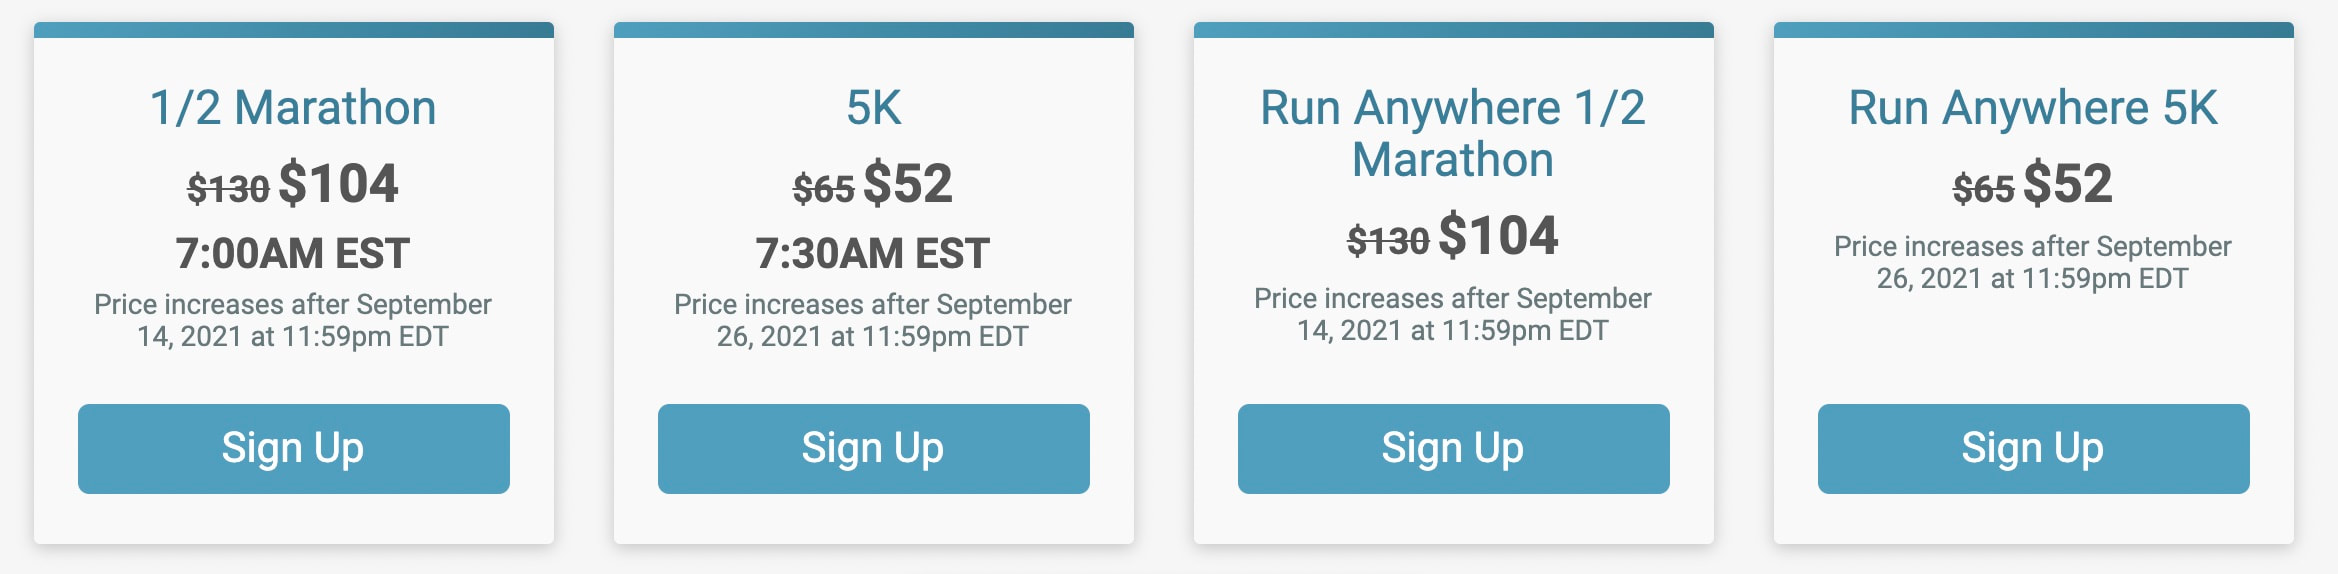 Price information for the Key West 2022 Half Marathon and 5K Races.